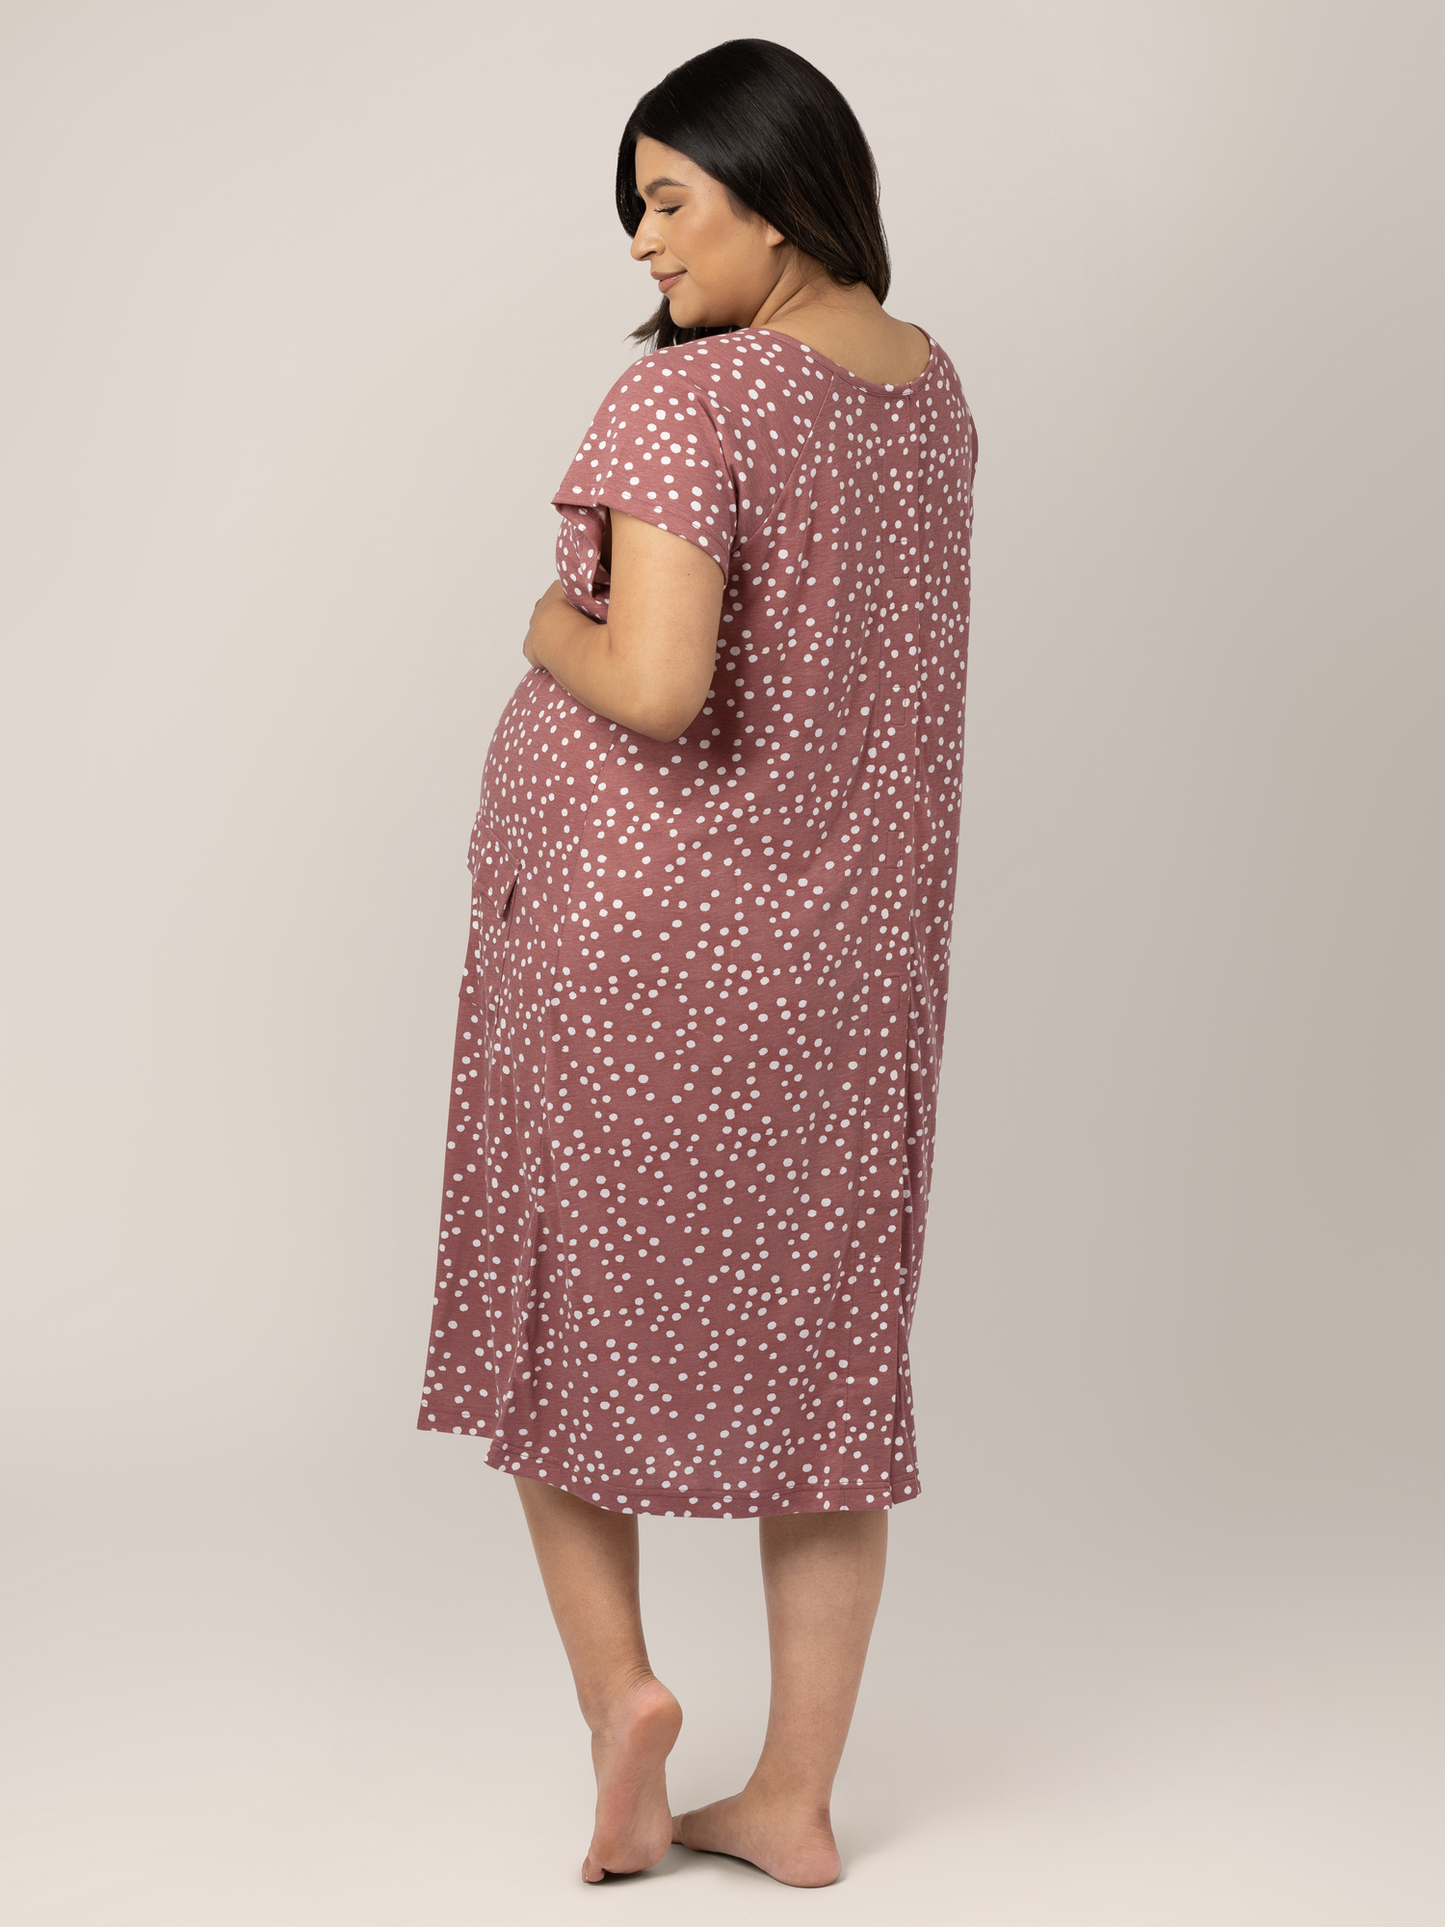 Back view of a pregnant model wearing the Universal Labor & Delivery Gown in Rosewood Polka Dot